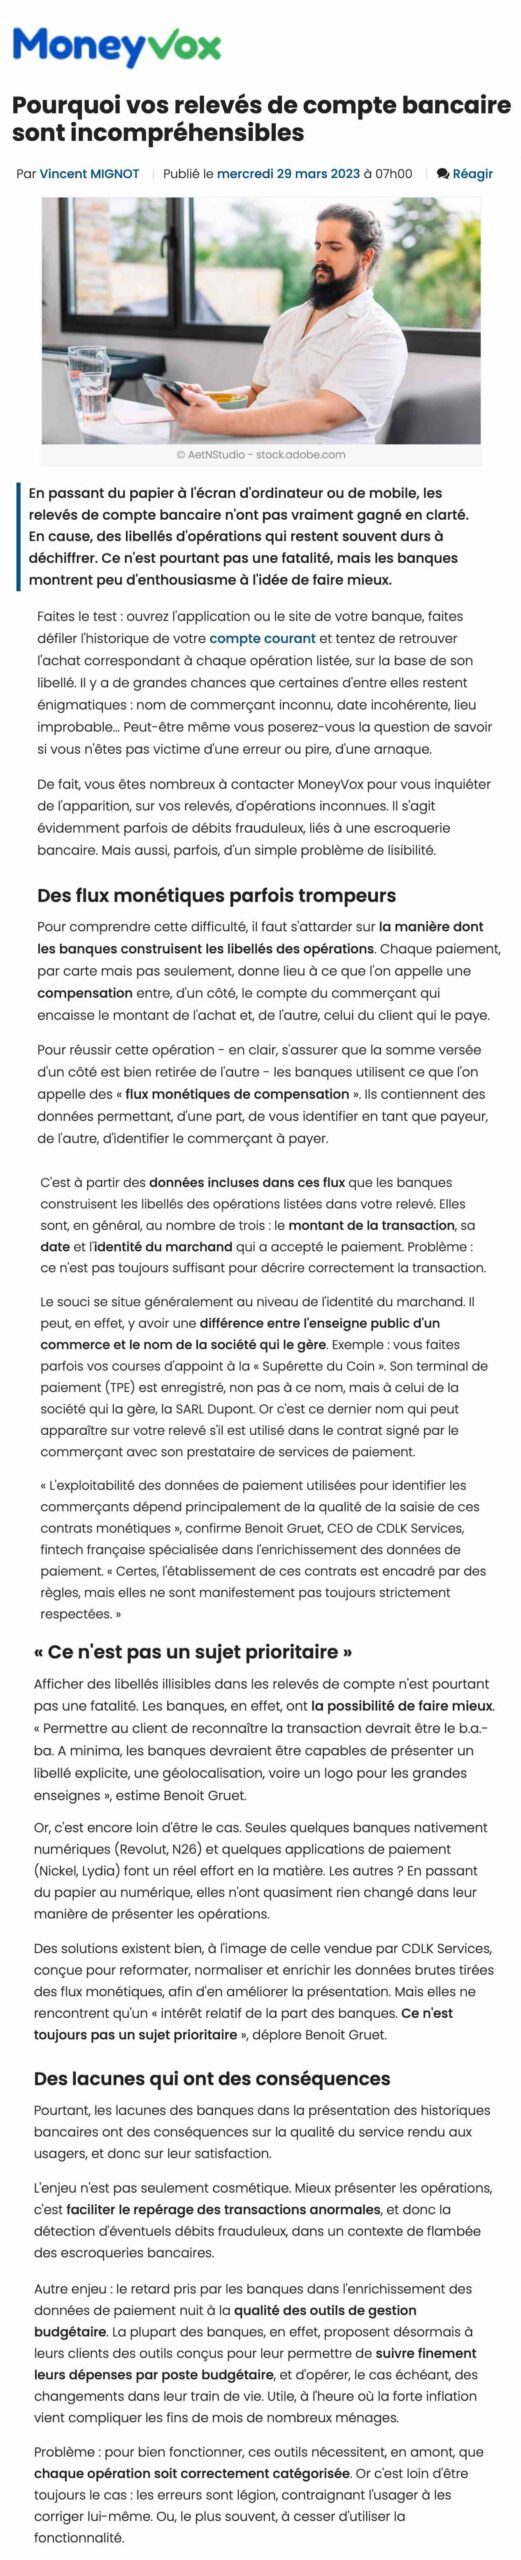 Article-Moneyvox-Releves-Comptes